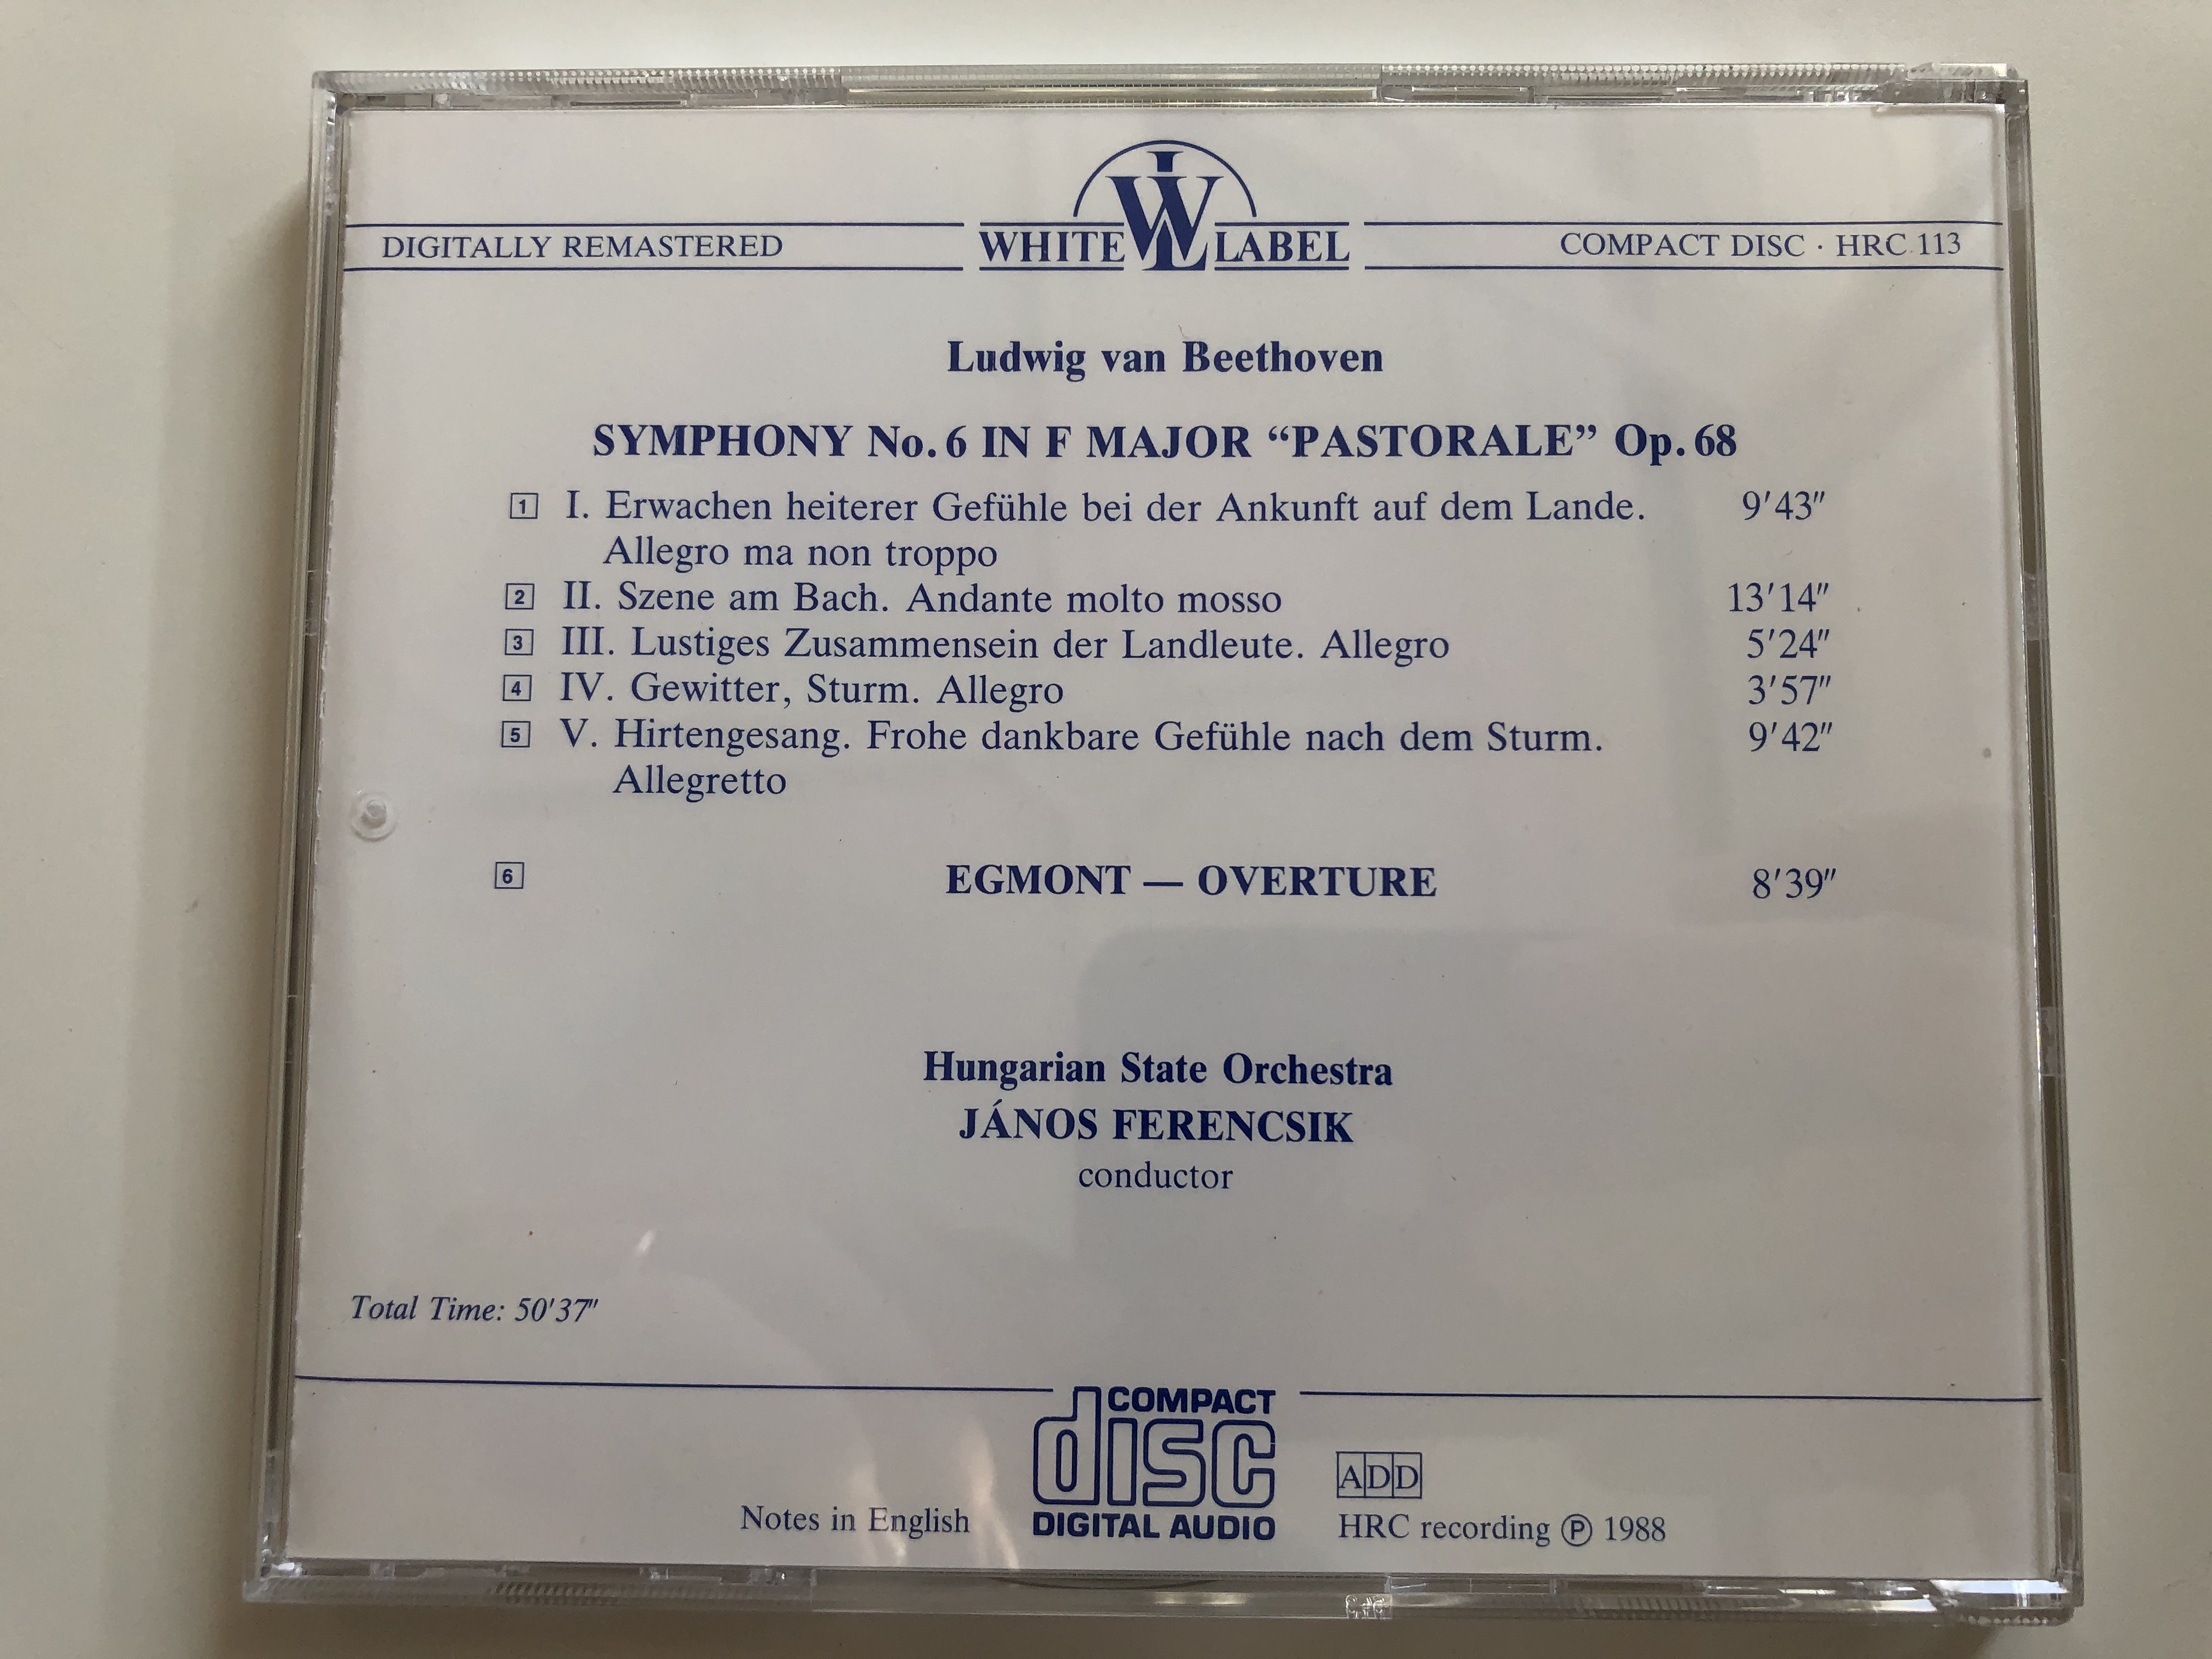 beethoven-symphony-no.-6-pastorale-egmont-overture-hungarian-state-orchestra-j-nos-ferencsik-white-label-audio-cd-1988-stereo-hrc-113-5-.jpg